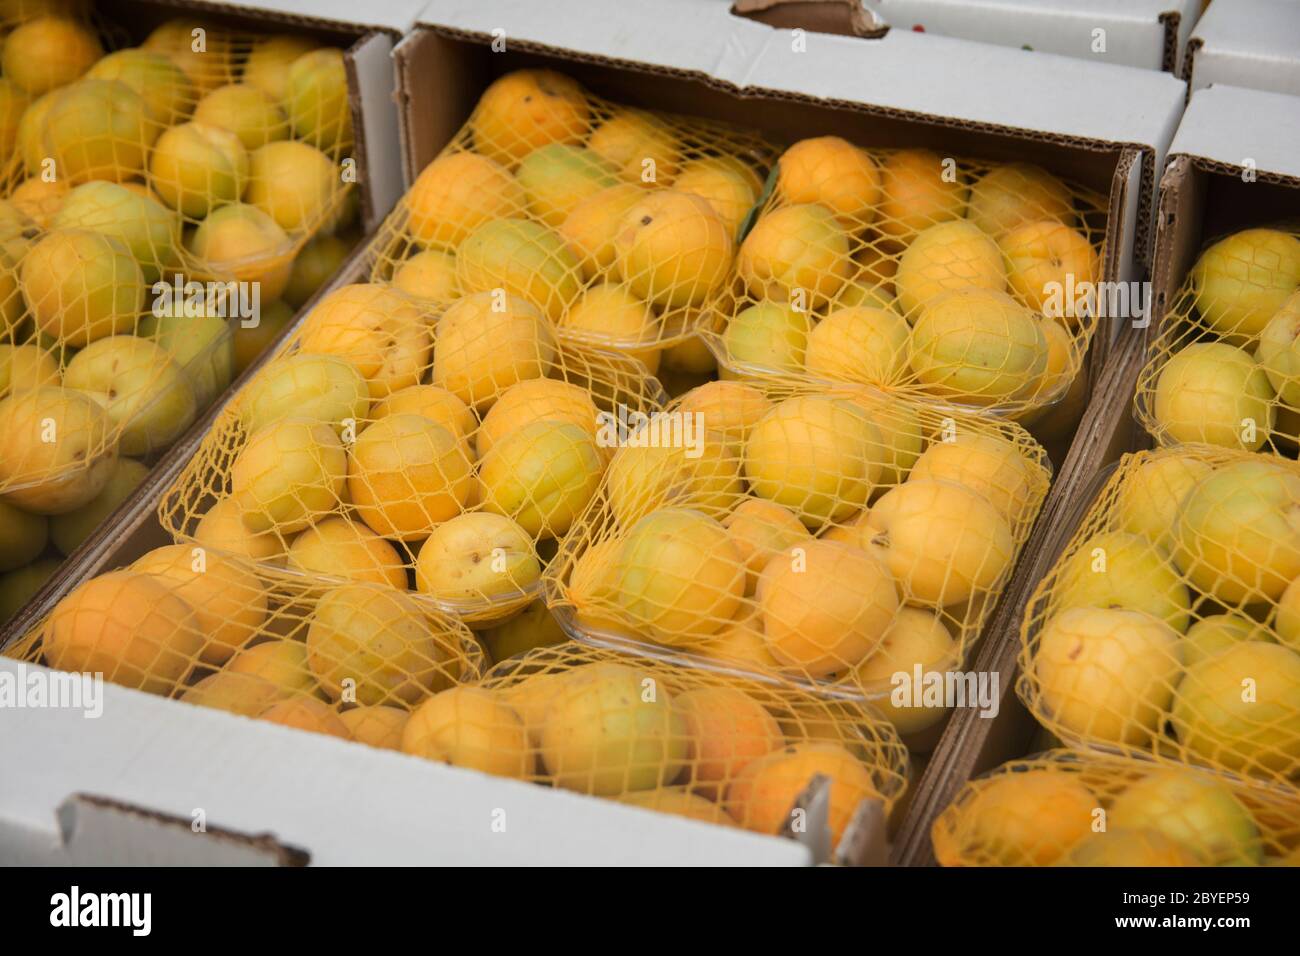 Boxes of Mirabelle plum fruits (Prunus domestica subsp. syriaca), presented for sale at the Mahane Yehuda Market, Jerusalem, Israel Stock Photo